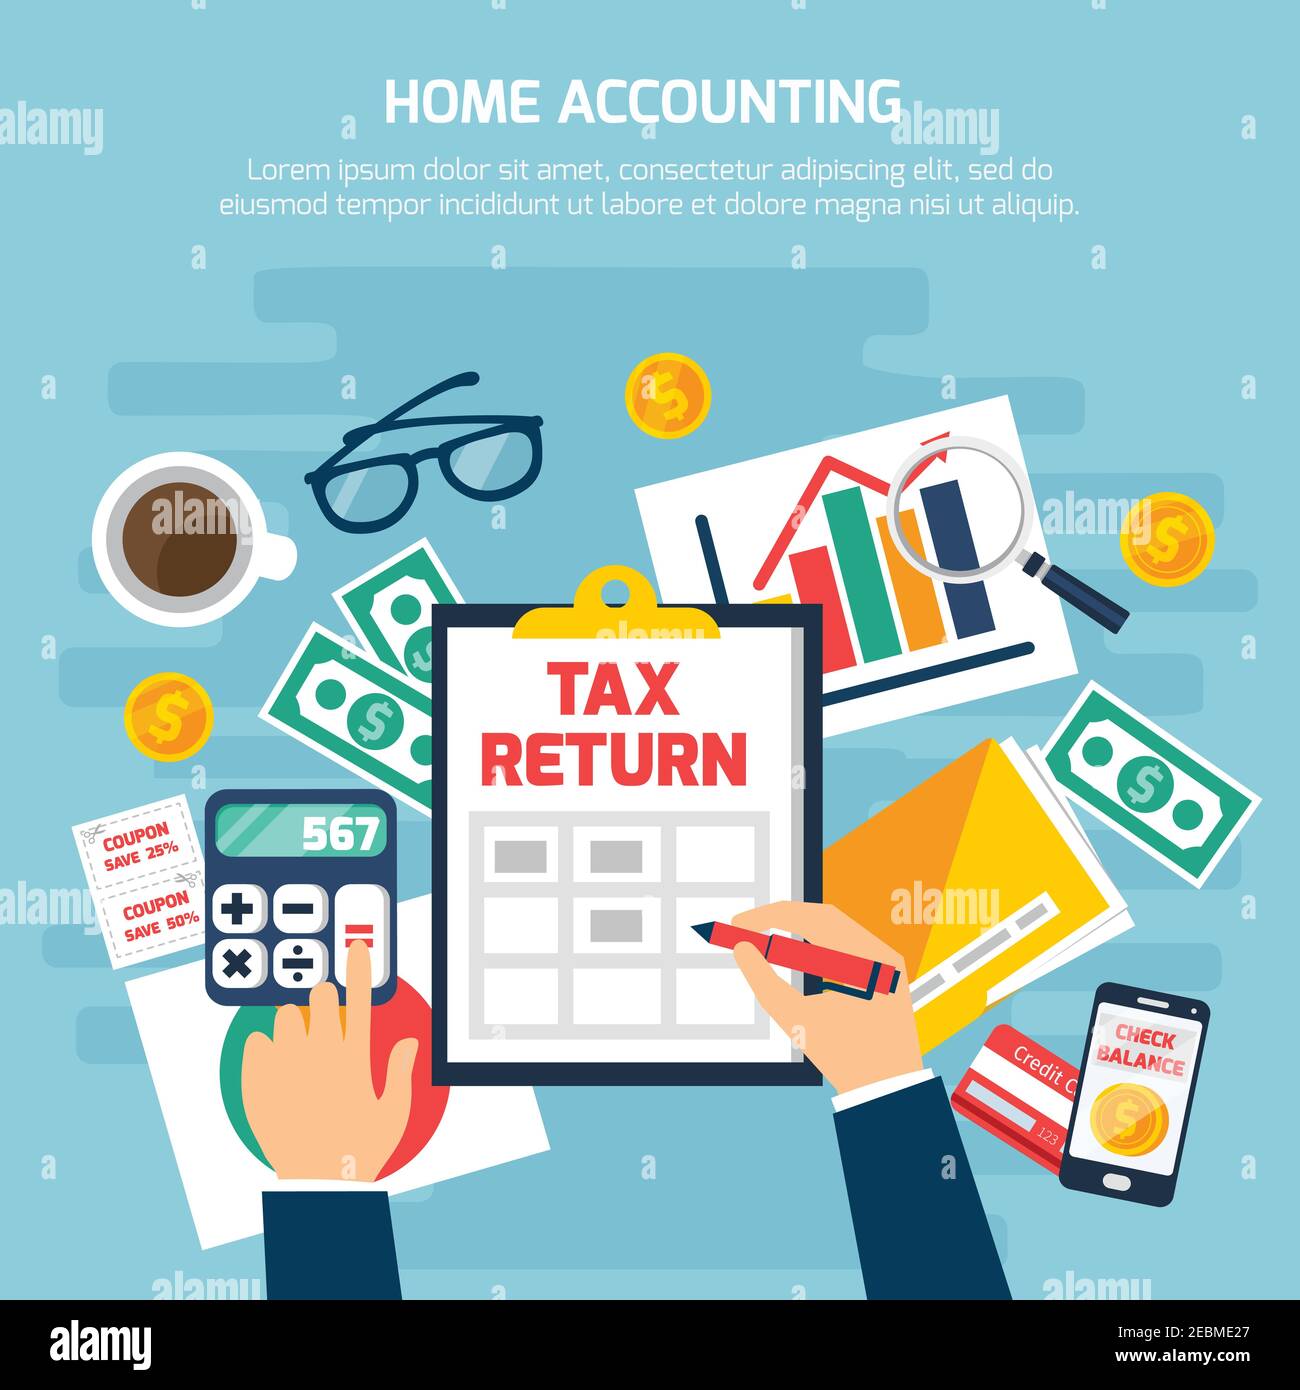 Home accounting composition with money and finance symbols on blue background flat vector illustration Stock Vector